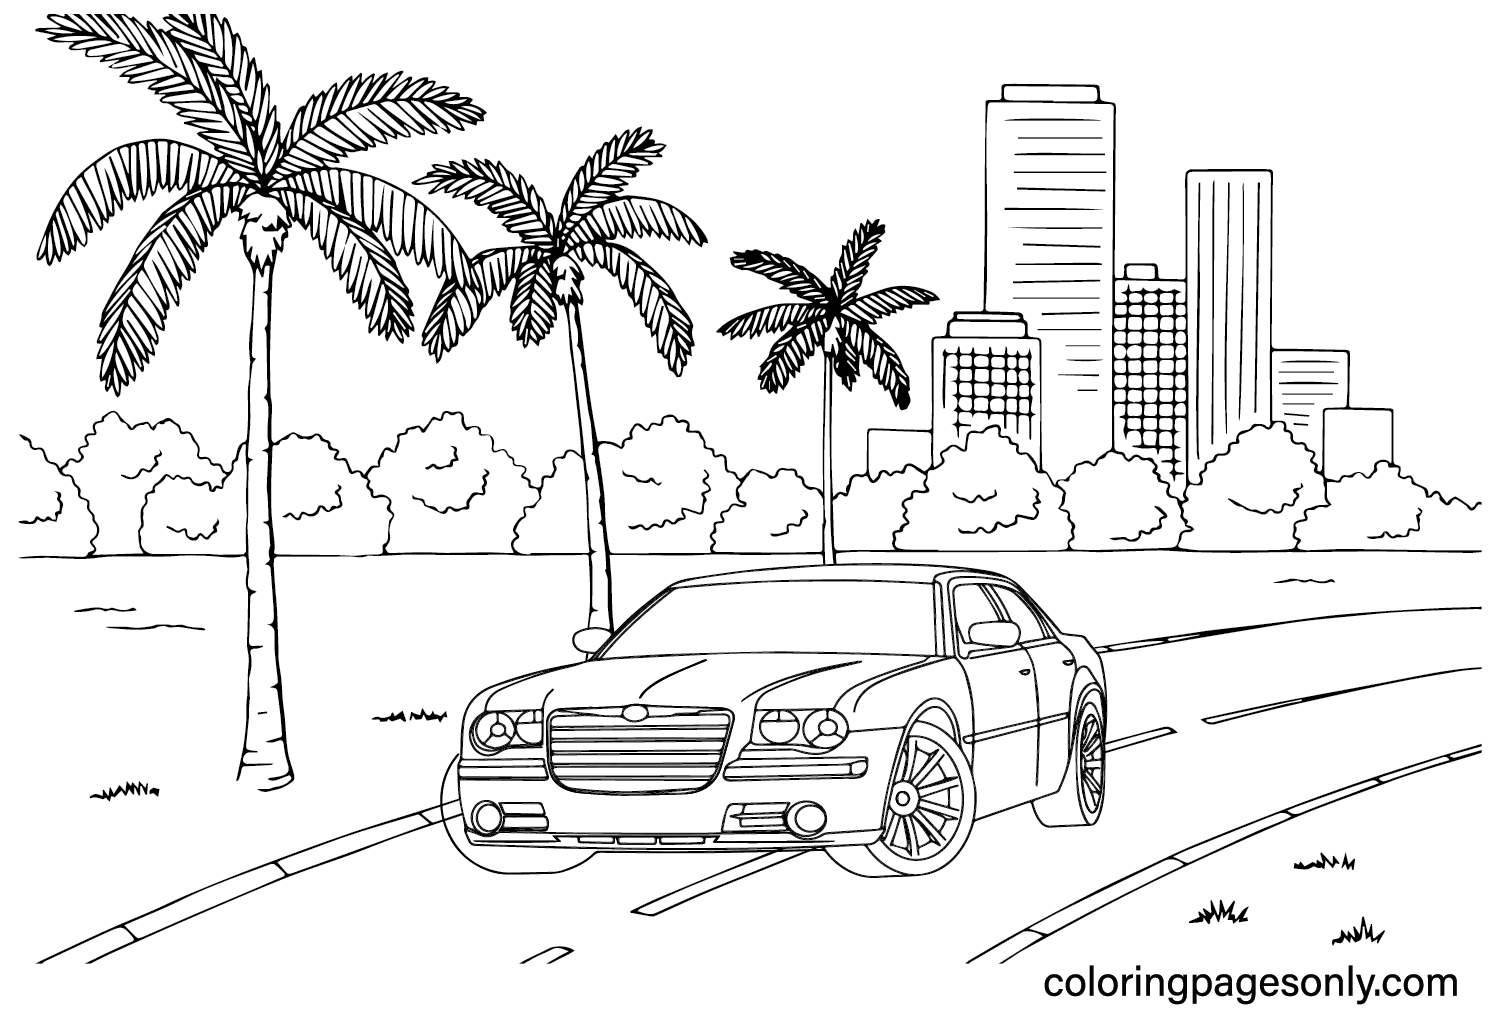 Aston Martin Coloring Page PDF - Free Printable Coloring Pages